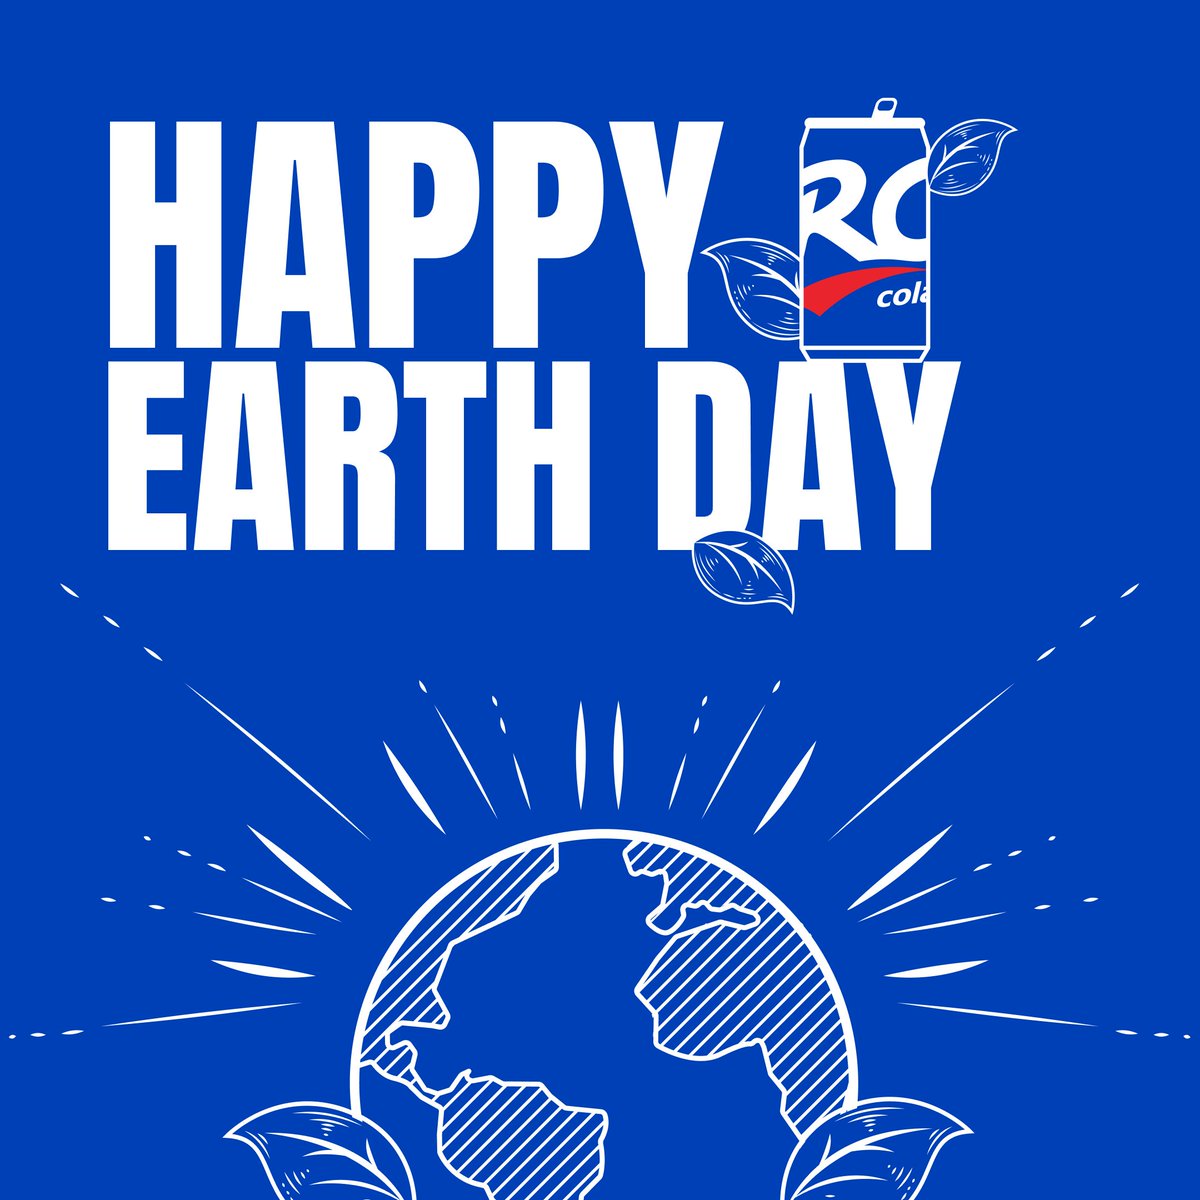 🌿 Celebrate Earth Day with traditions like planting trees, biking to work, or community service. After a hard day's work, refresh with an ice-cold RC Cola. Cheers to our planet's well-being! 🌍 #EarthDay